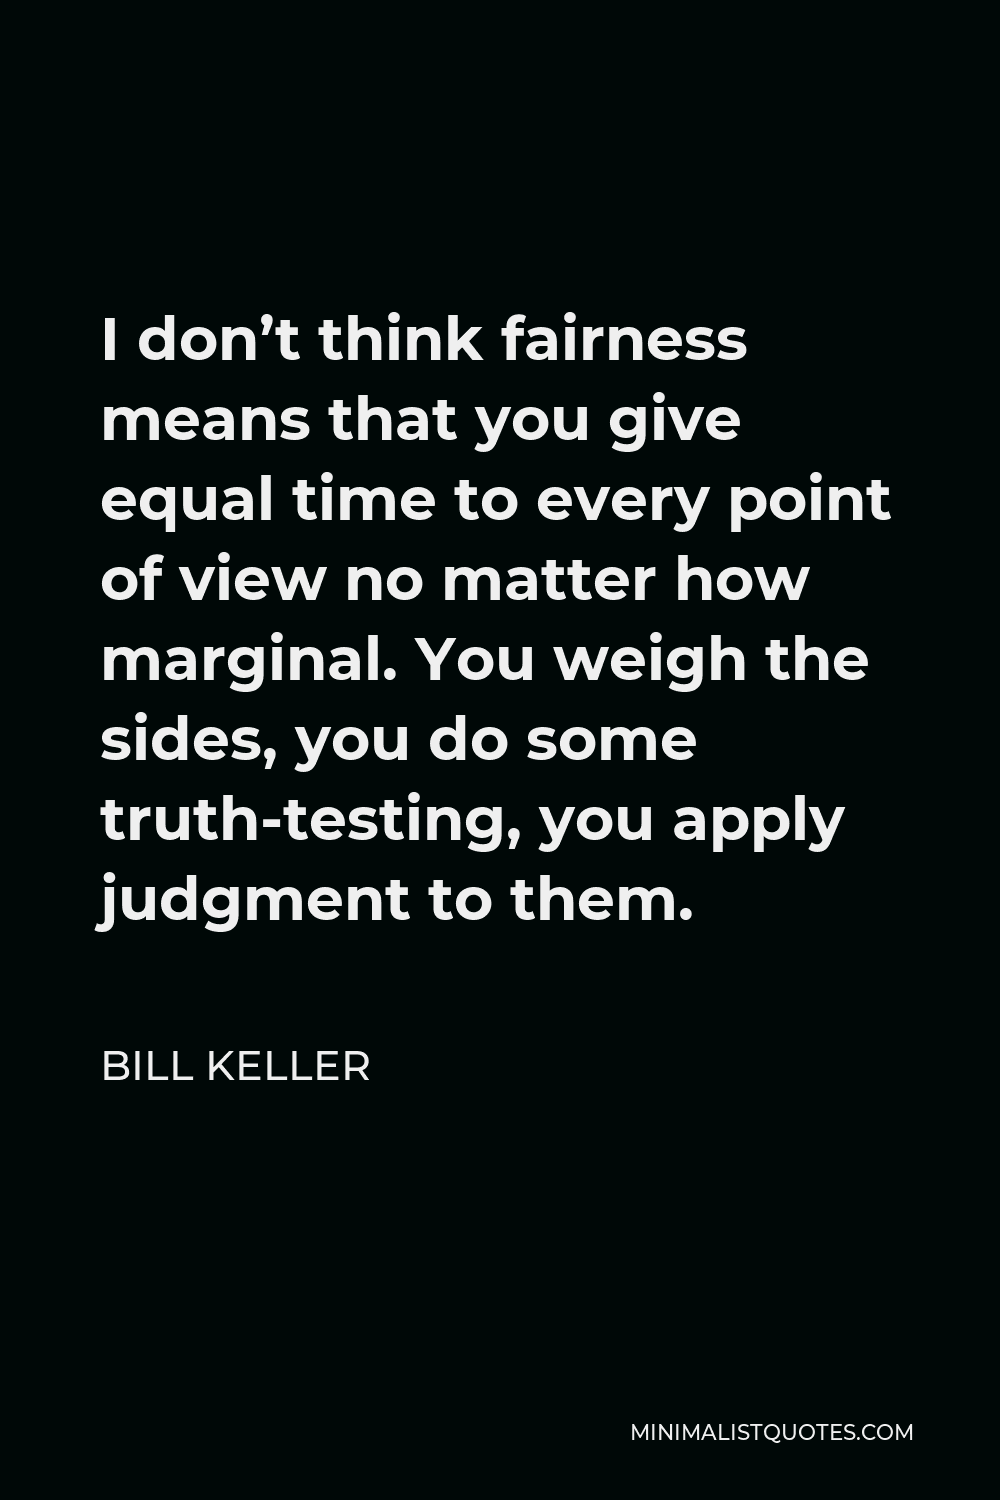 Bill Keller Quote - I don’t think fairness means that you give equal time to every point of view no matter how marginal. You weigh the sides, you do some truth-testing, you apply judgment to them.